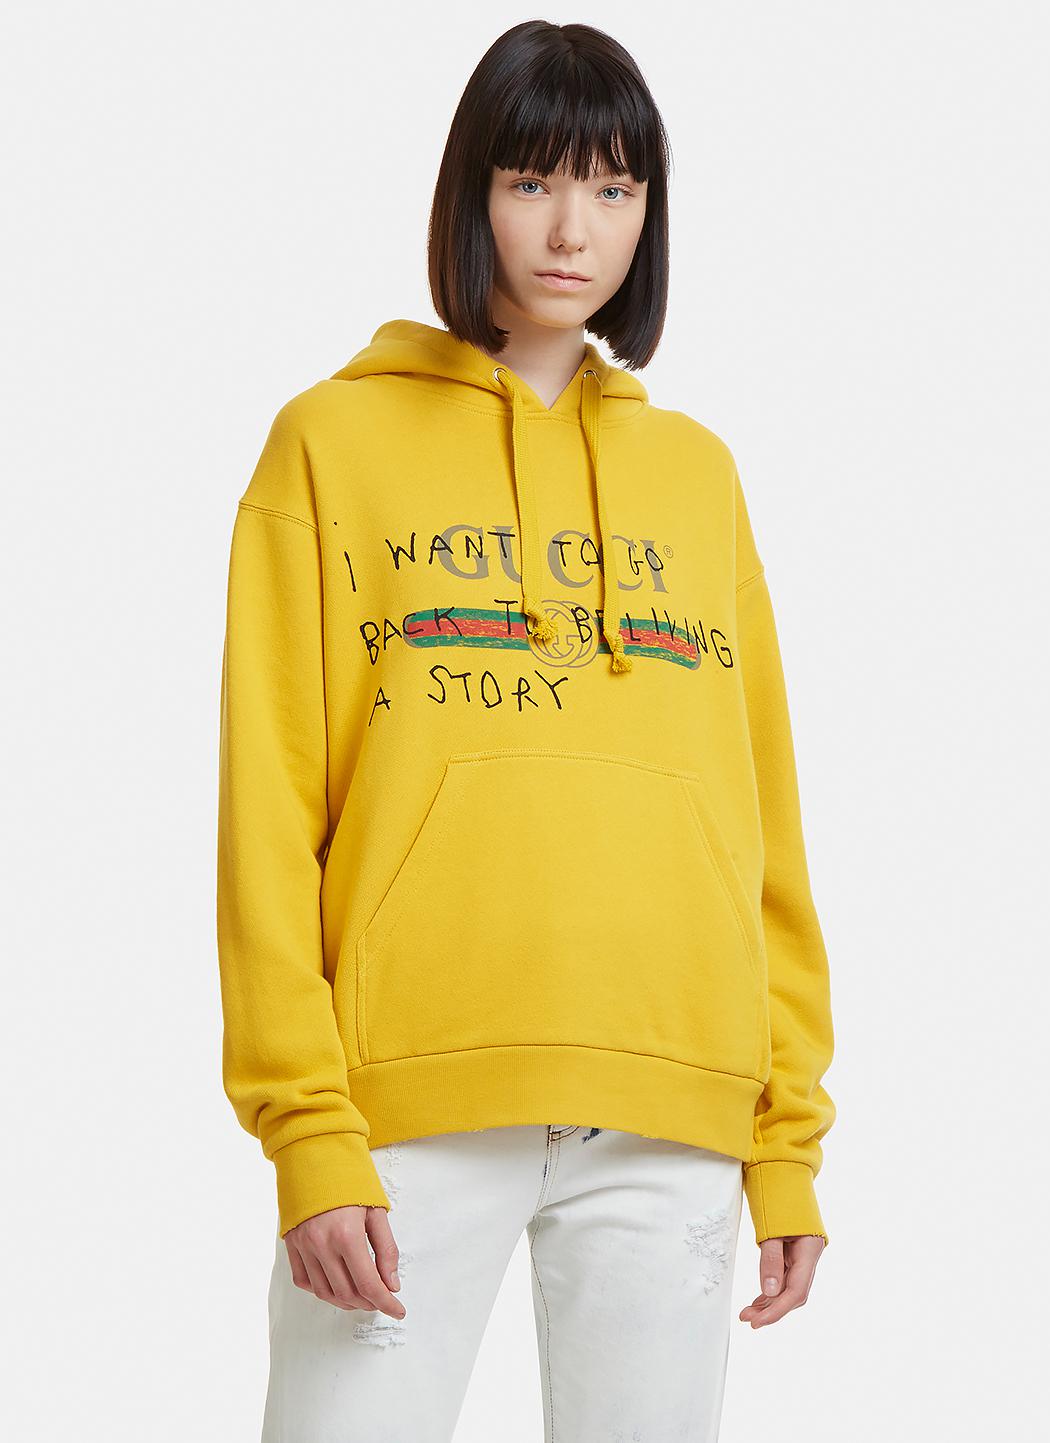 gucci hoodie i want to go back to believing a story